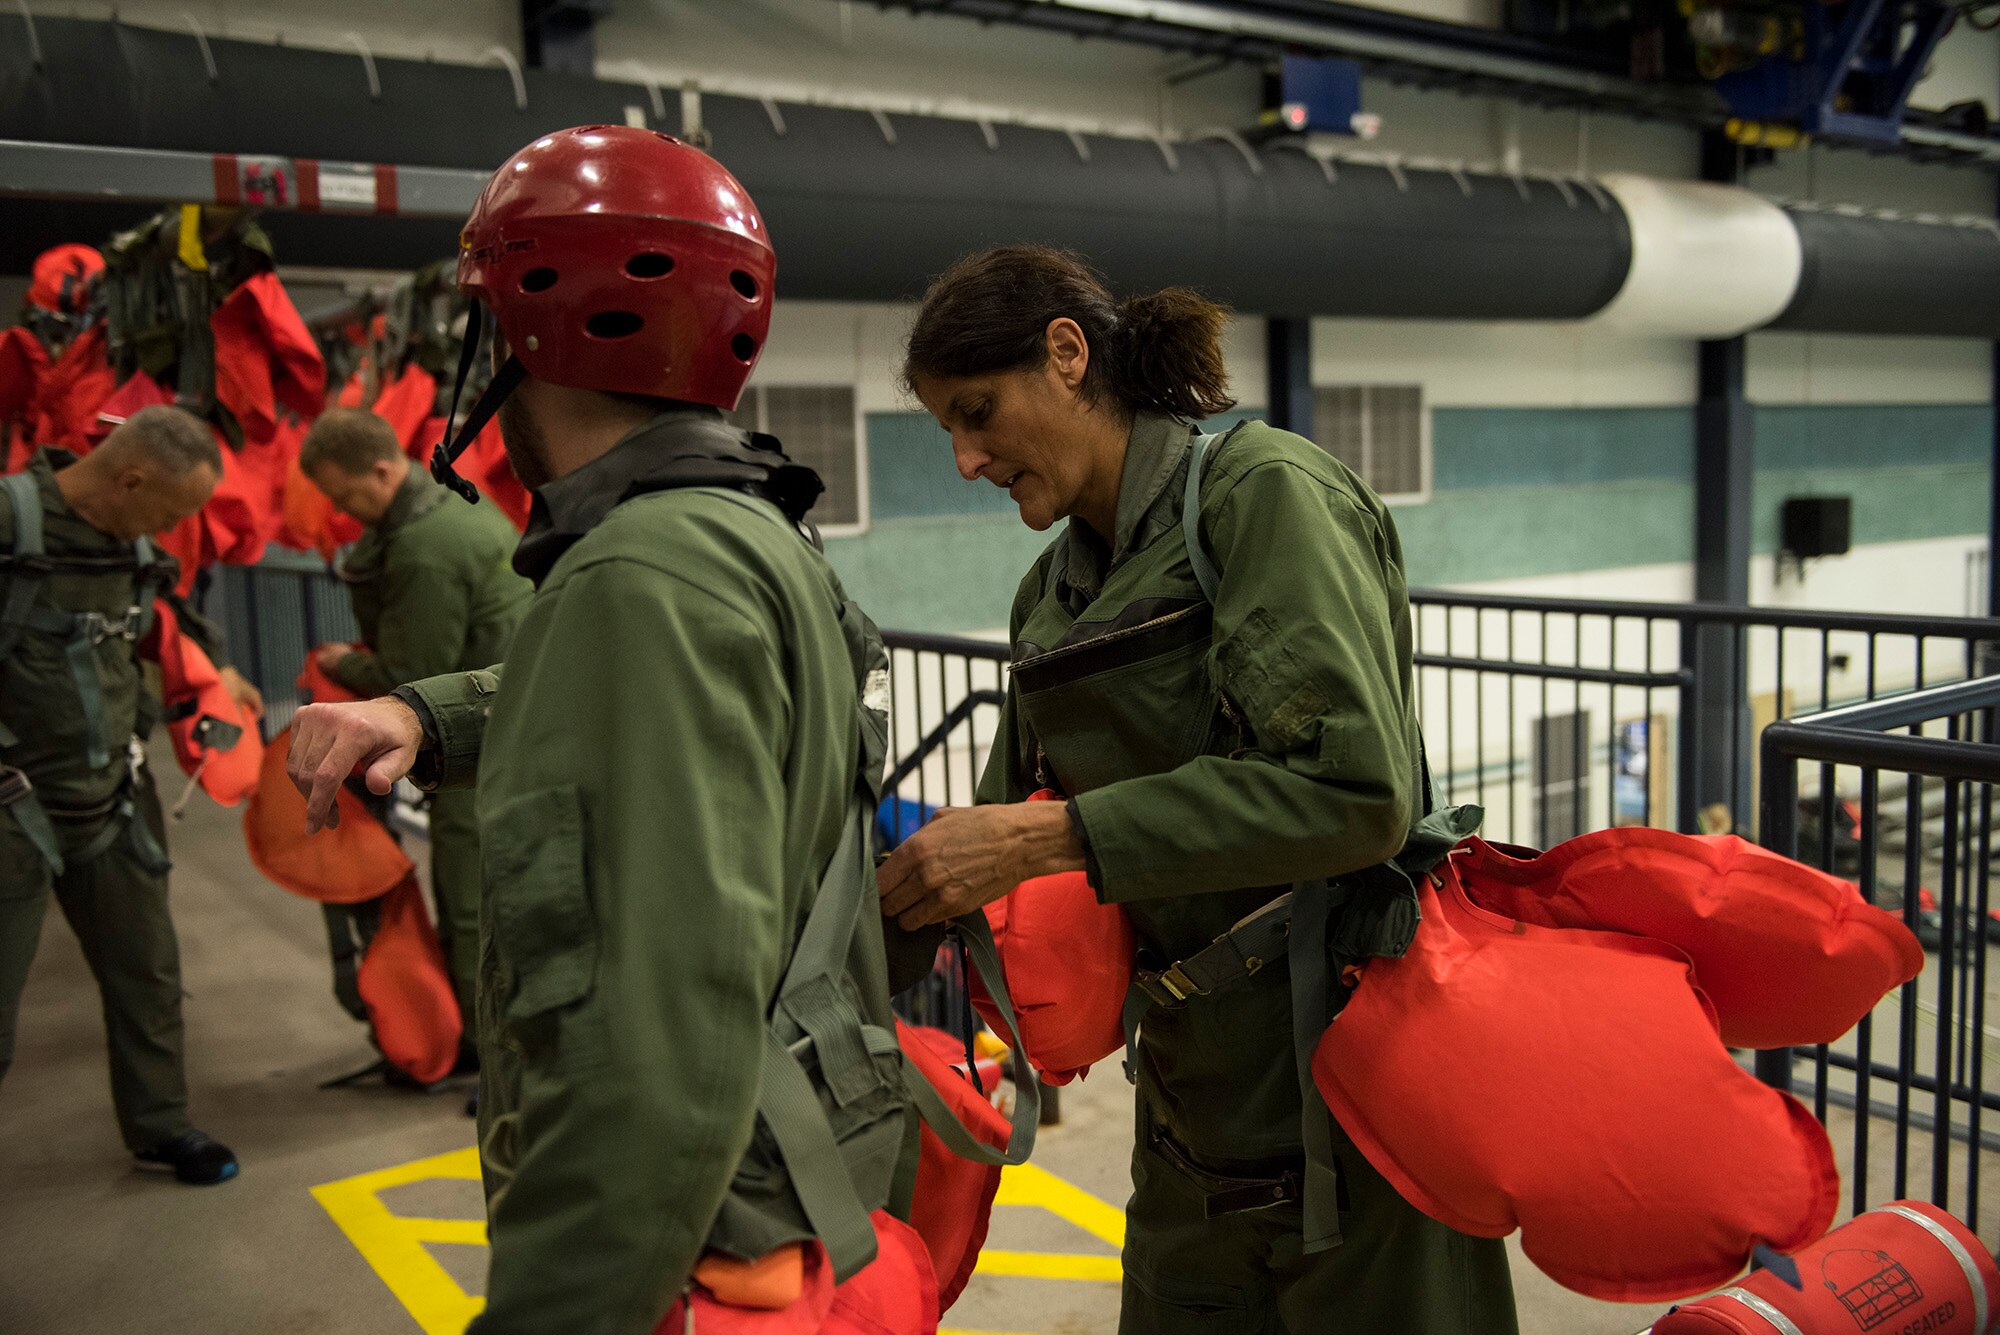 Sunita Williams, NASA astronaut, helps a fellow crew member suit up in preparation for water survival training Feb. 10, 2017, at Fairchild Air Force Base, Wash. The Survival School is the only military unit solely dedicated to survival and rescue training. (U.S. Air Force photo/ Airman 1st Class Ryan Lackey)